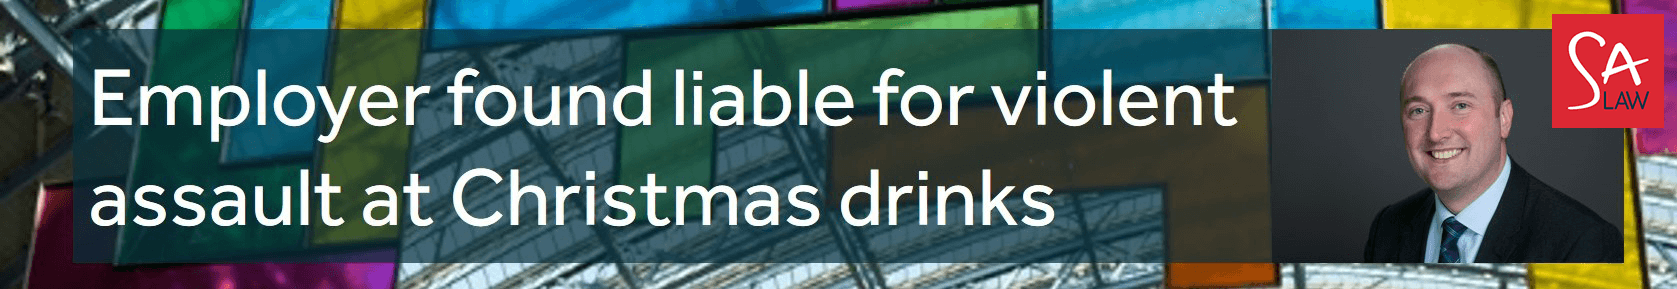 FIND OUT WHY THIS EMPLOYER WAS FOUND LIABLE FOR VIOLENT ASSAULT AT CHRISTMAS DRINKS